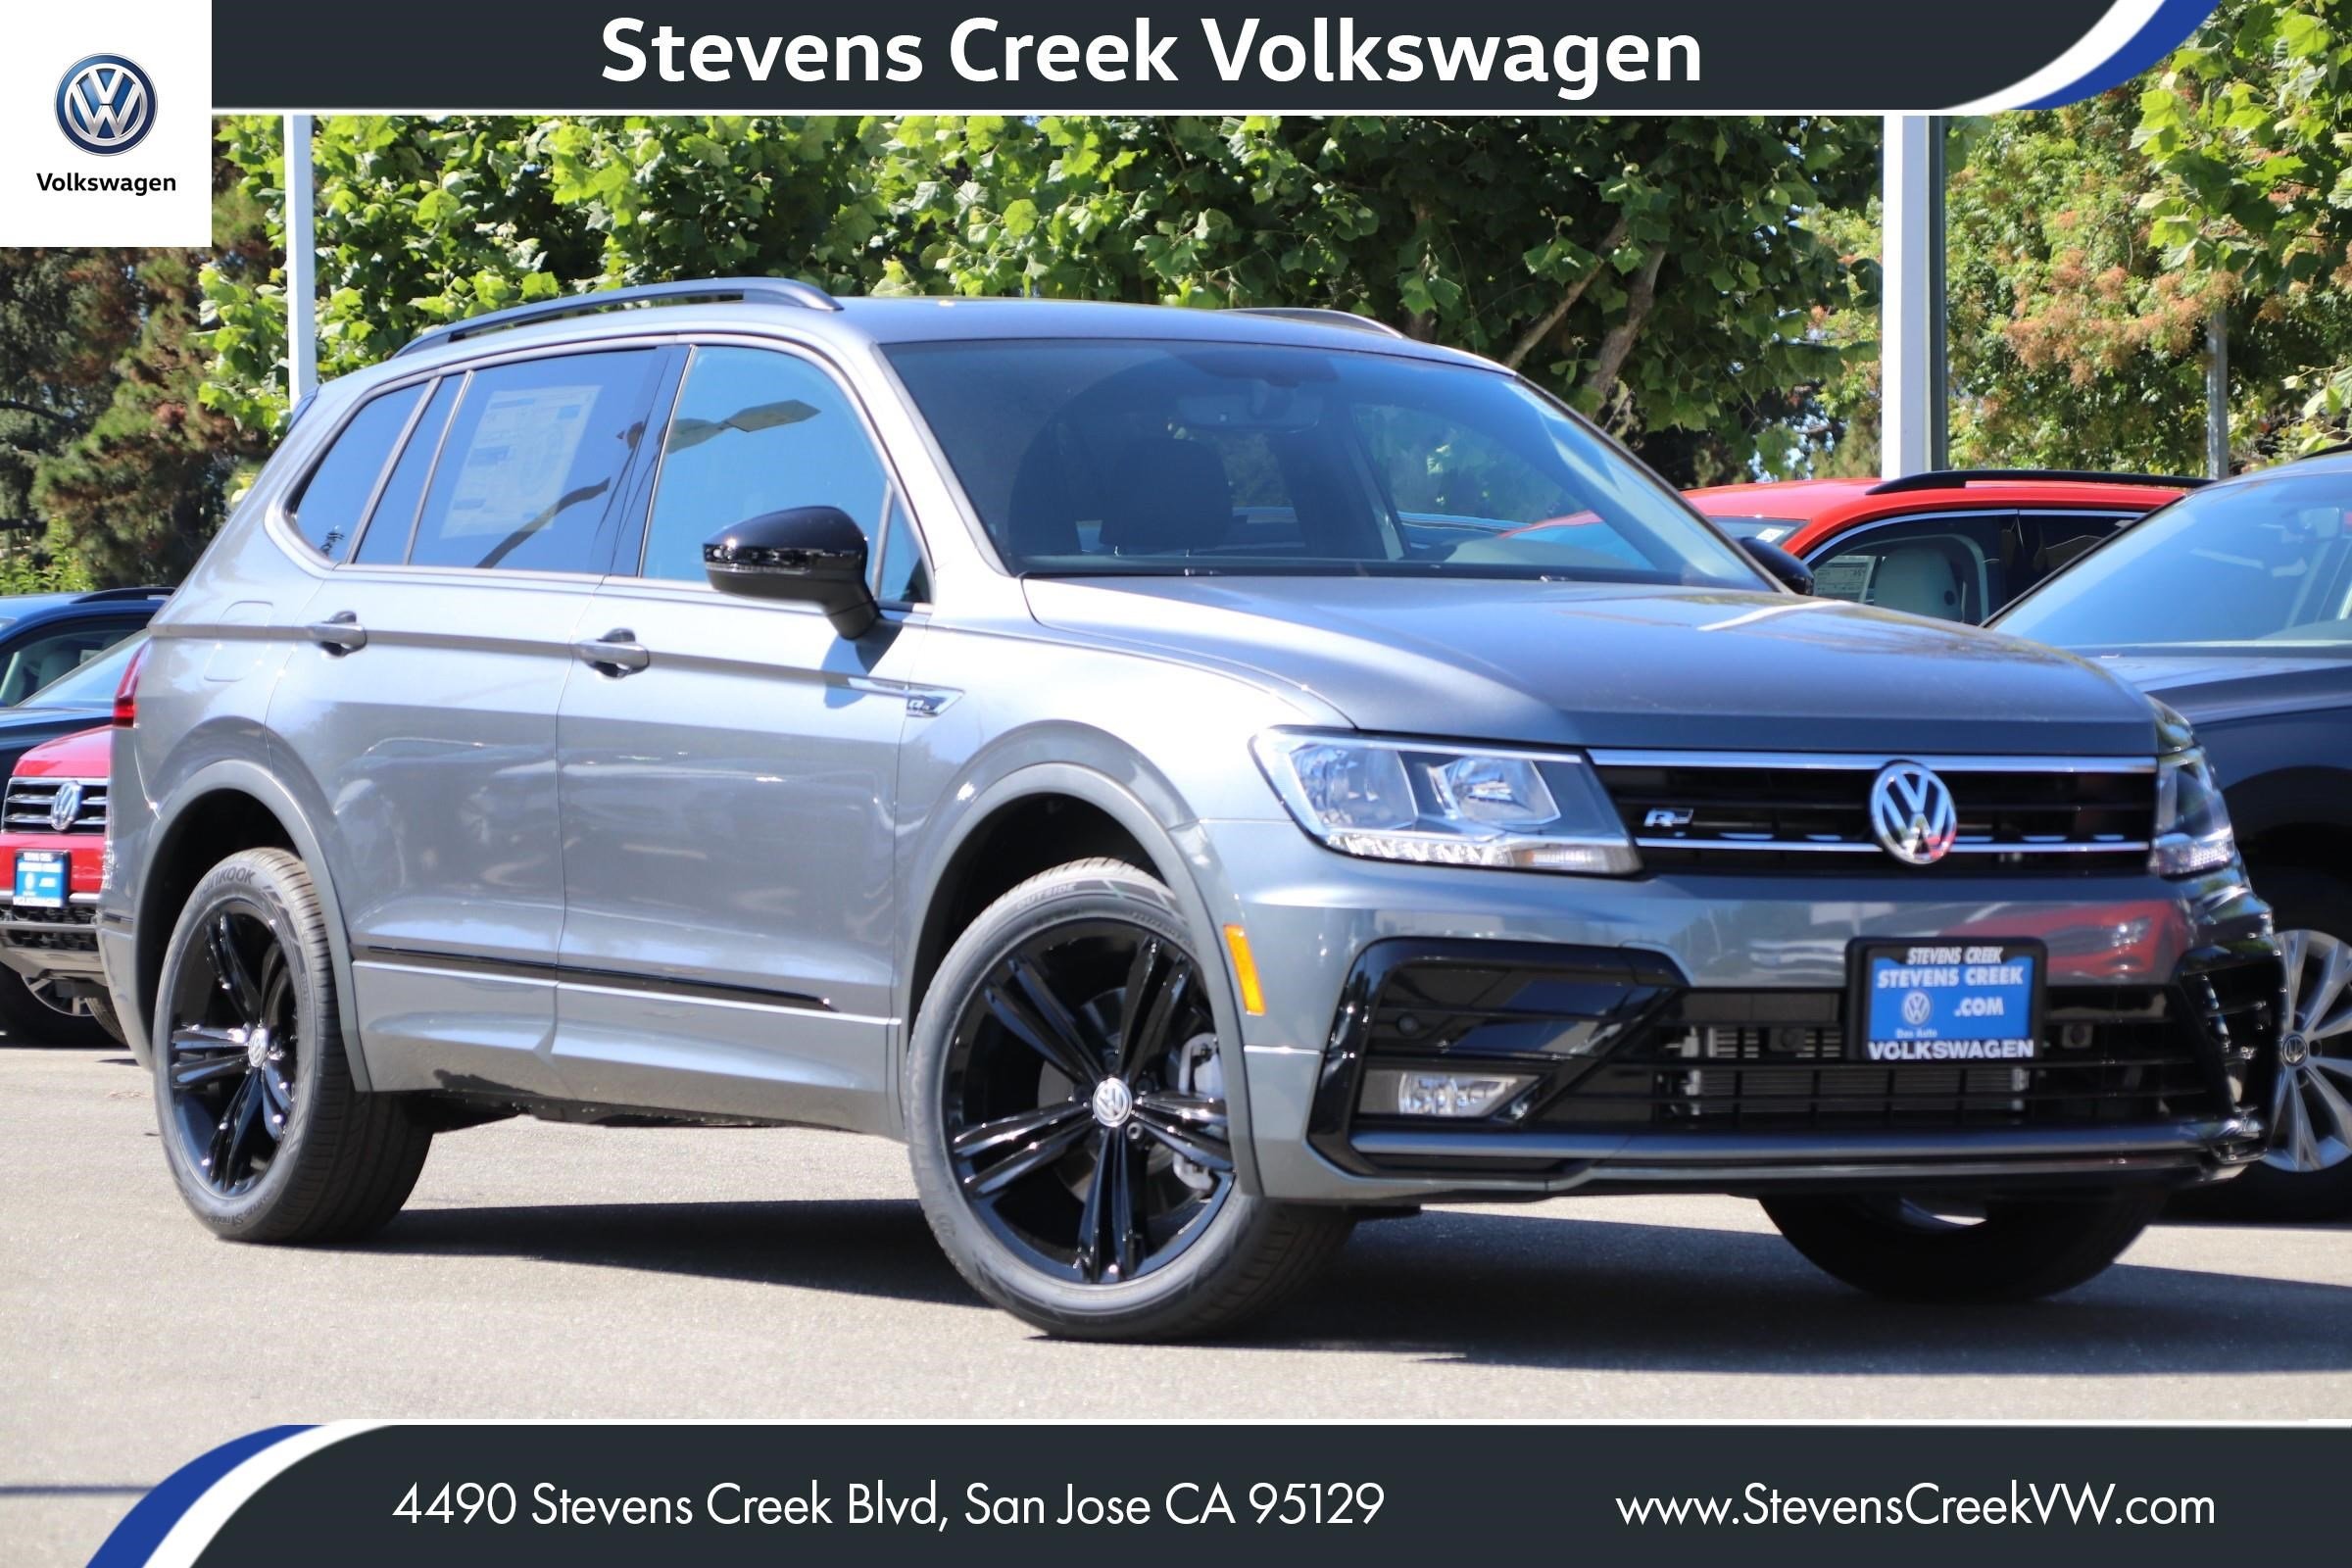 New 2019 Volkswagen Tiguan Sel R Line Black With Navigation Awd